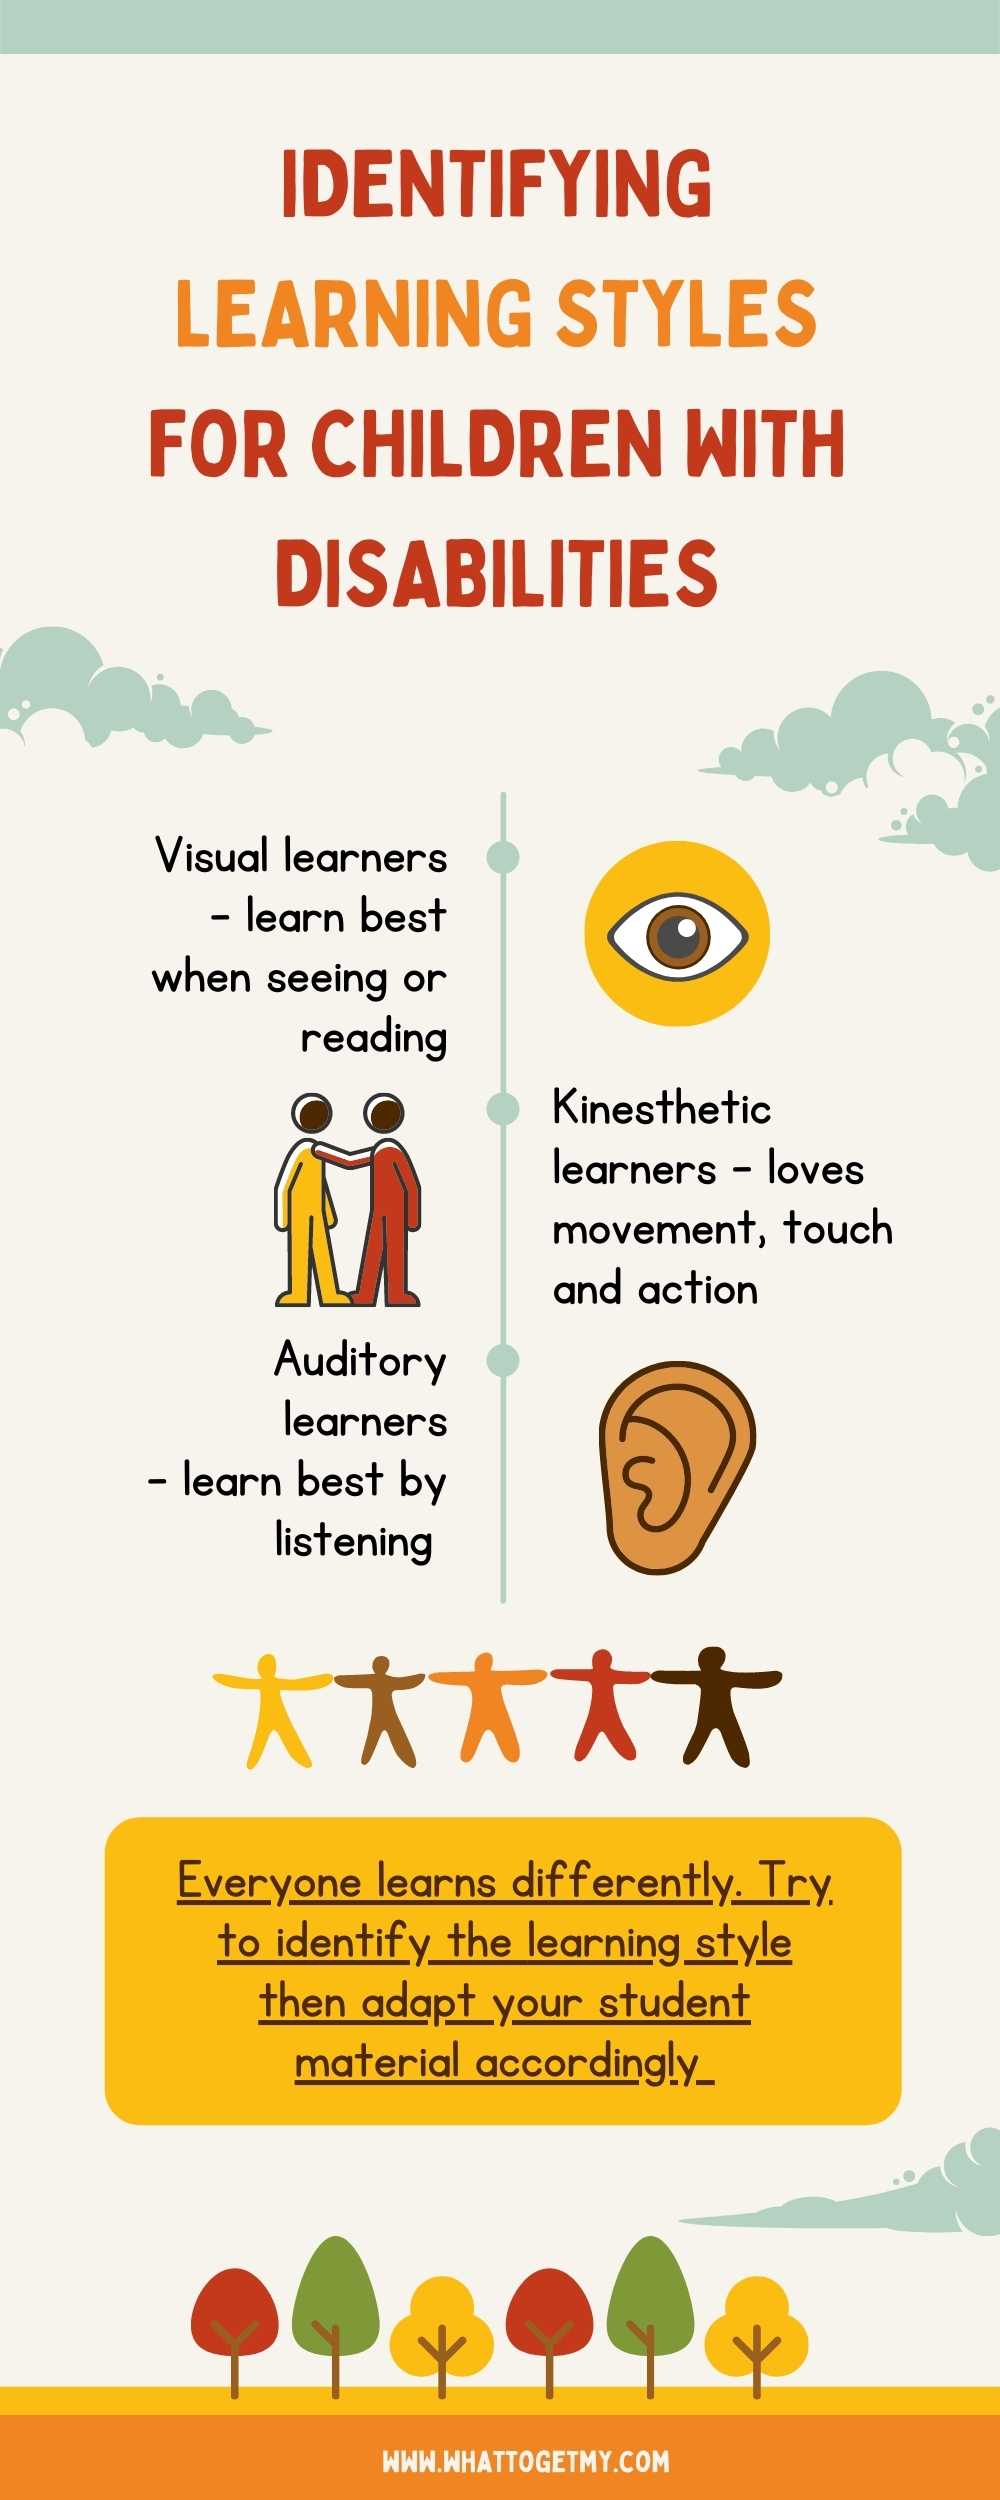 IDENTIFYING LEARNING STYLES FOR CHILDREN WITH DISABILITIES